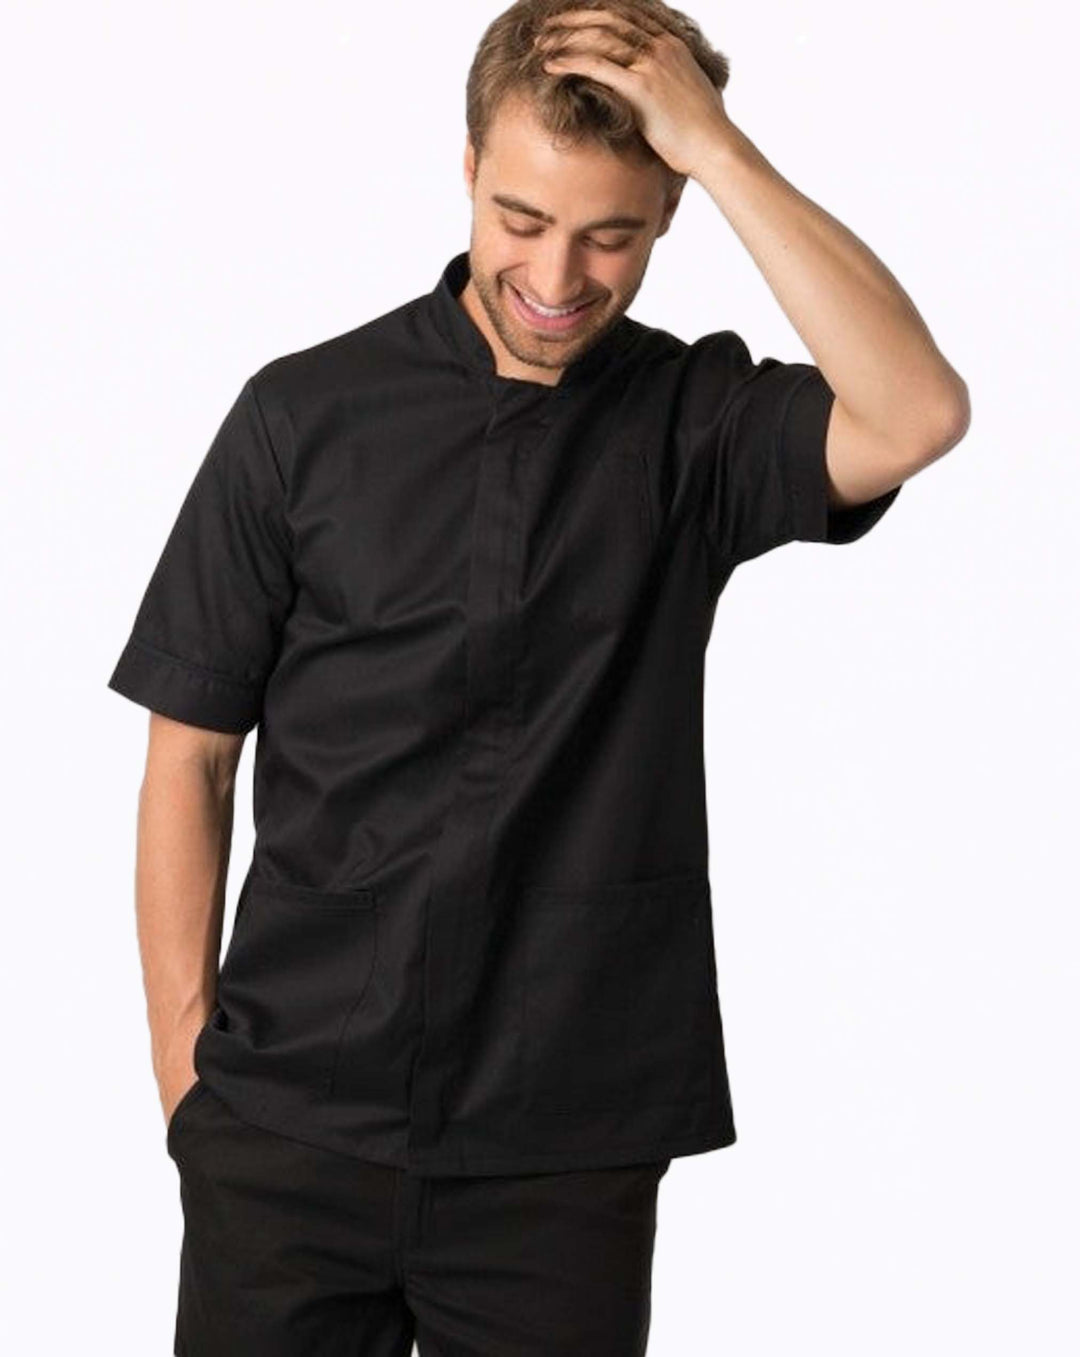 Beauty Salon, Spa and Hairdressing Uniforms Tunics for Men – Salonwear